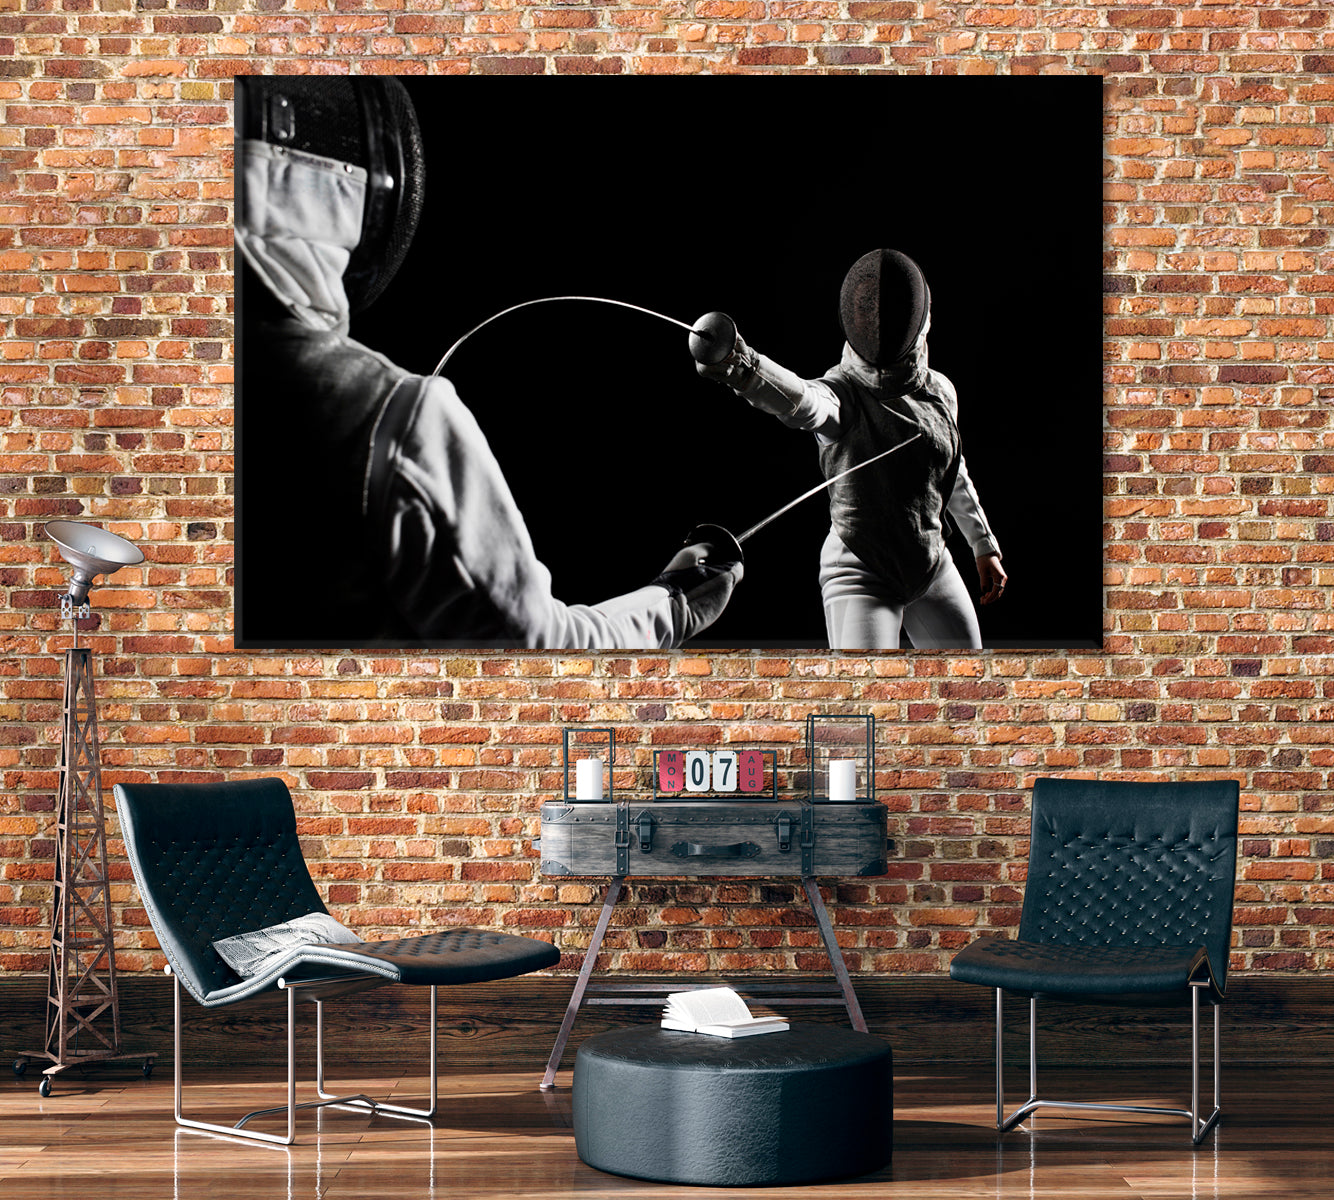 Fencing Action Canvas Print ArtLexy 1 Panel 24"x16" inches 